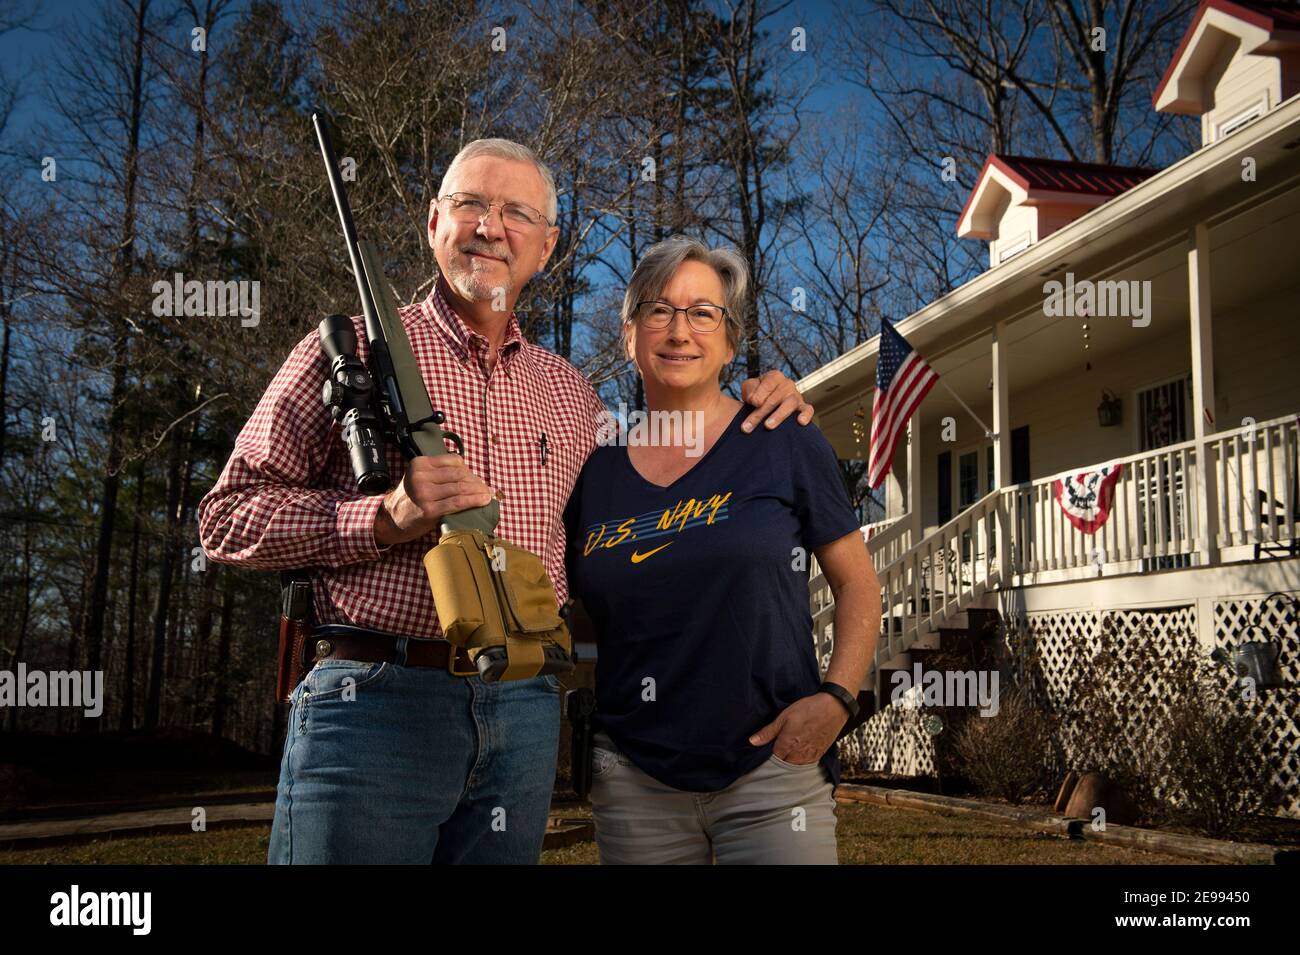 Jasper, GA, USA. 3rd Feb, 2021. Jerry Daniels and his wife Laura, both Navy veterans, registered Republicans and gun owners, at their Jasper, Georgia home. Both insist conservatives are still the core of Georgia voters, despite recent elections which they maintain were neither honest nor fair. 'I believe we are the working backbone of Georgia, ' he said. They are saddened by the mediaÃs unflattering image of conservatives. 'We have been referred to as Ã”people clinging to our guns and bibles, or characterized as Ã”basket of deplorables,Ã' he said, angered that federal agents reported Stock Photo